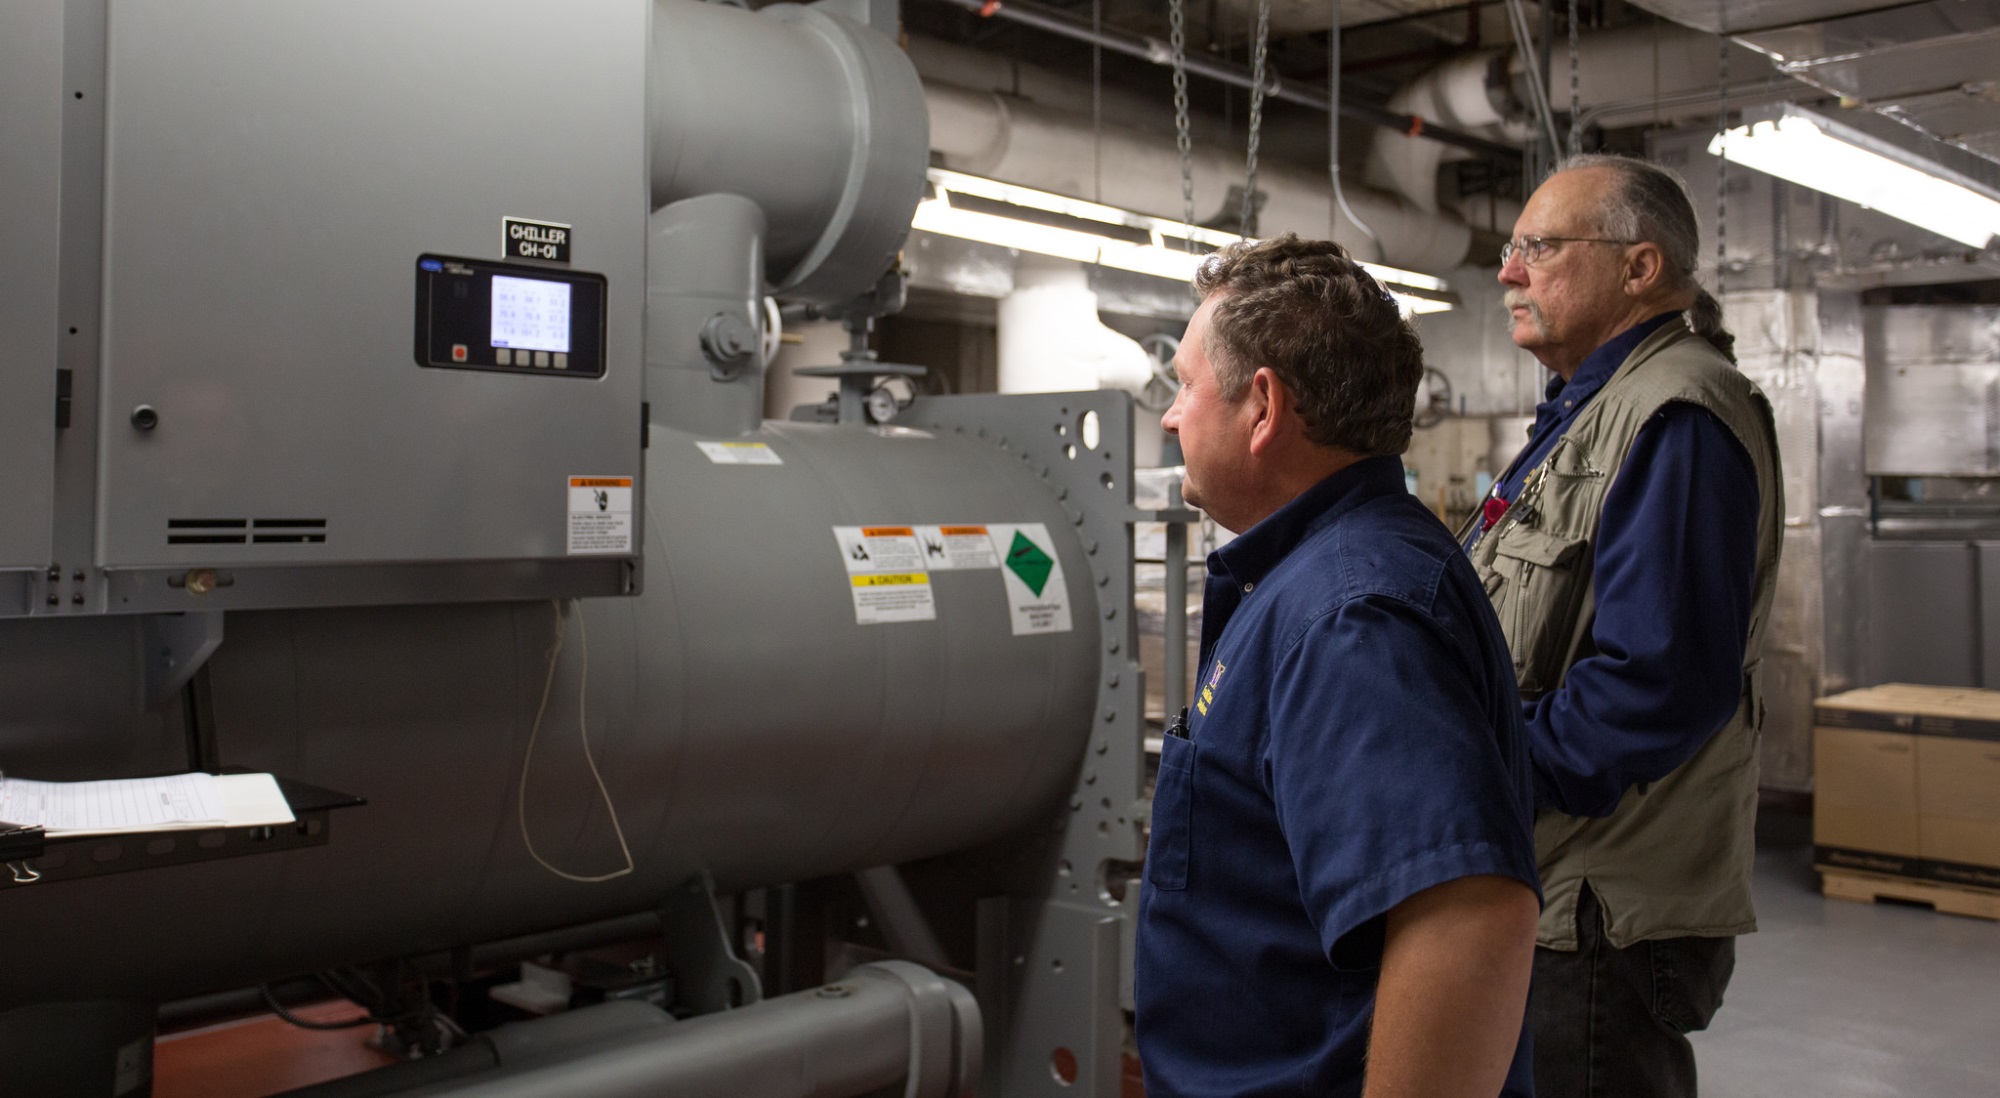 Peter Gorokhovskiy and Eric Johnston check on the tower’s chiller system during an after-hours event.